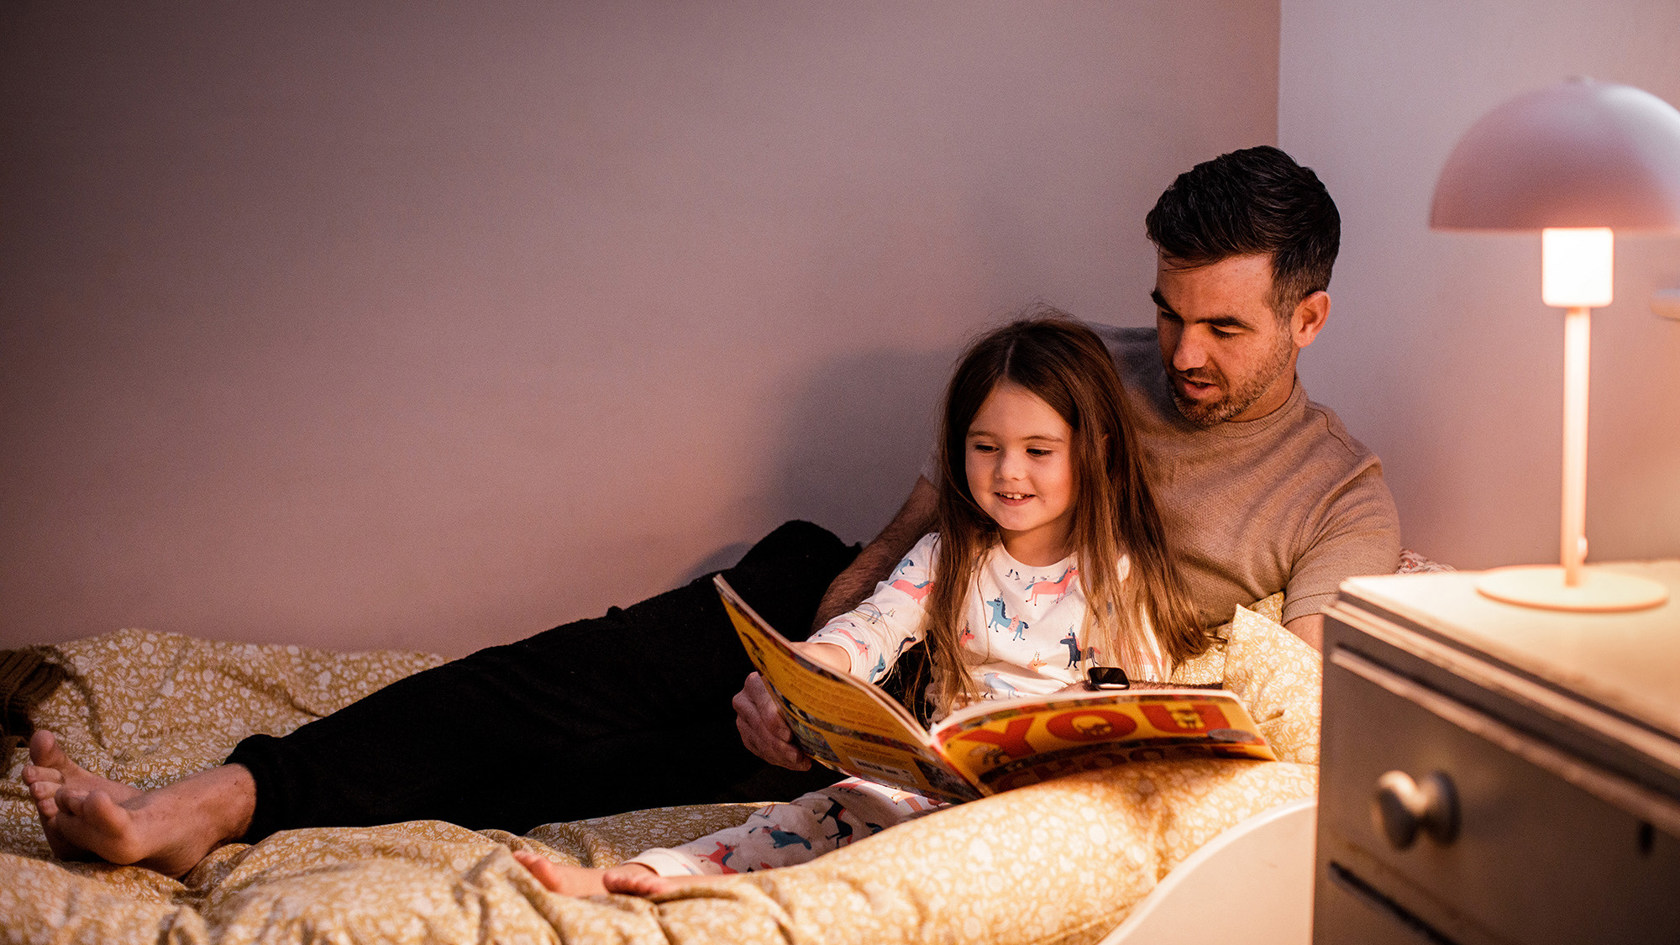 A father reads a story to his daughter in bed.